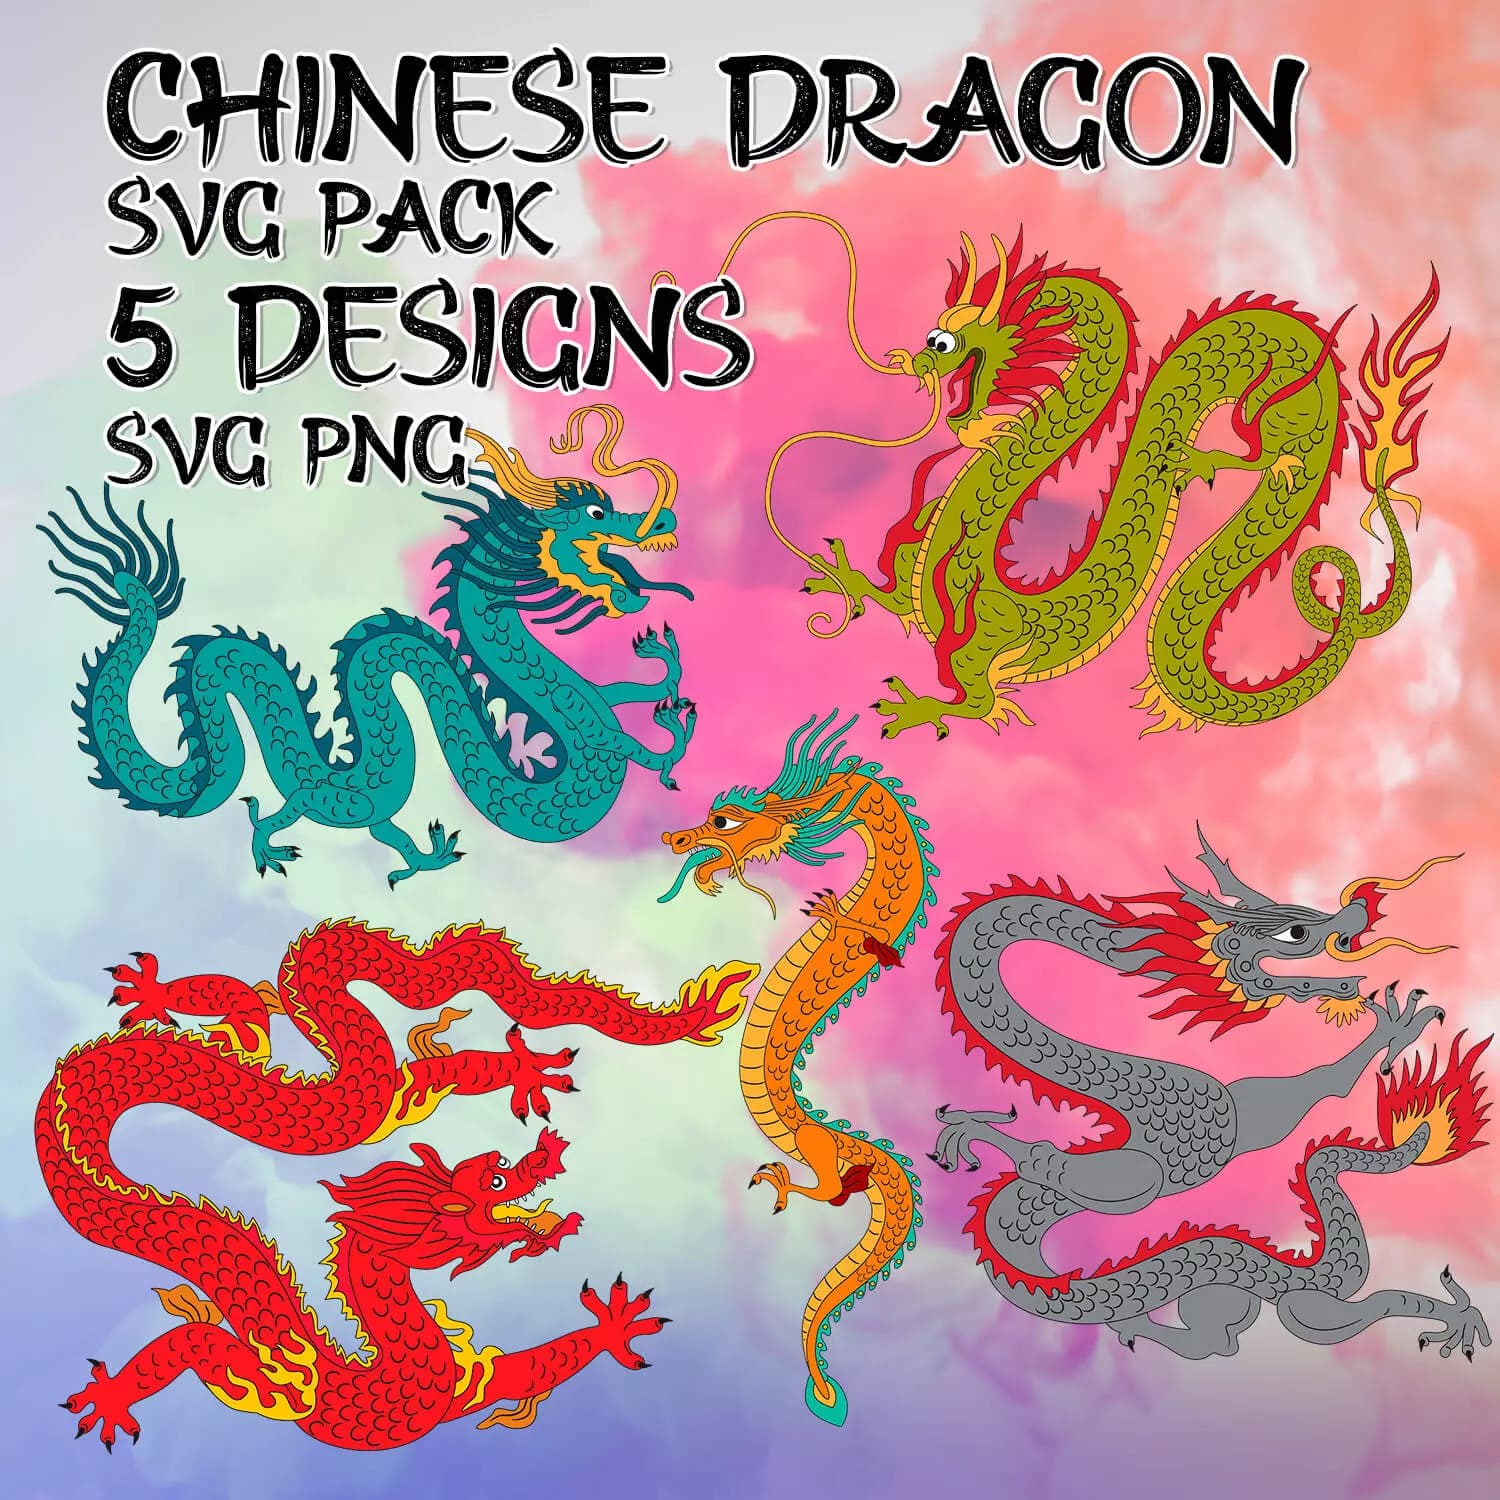 Chinese dragon svg pack 5 designs.